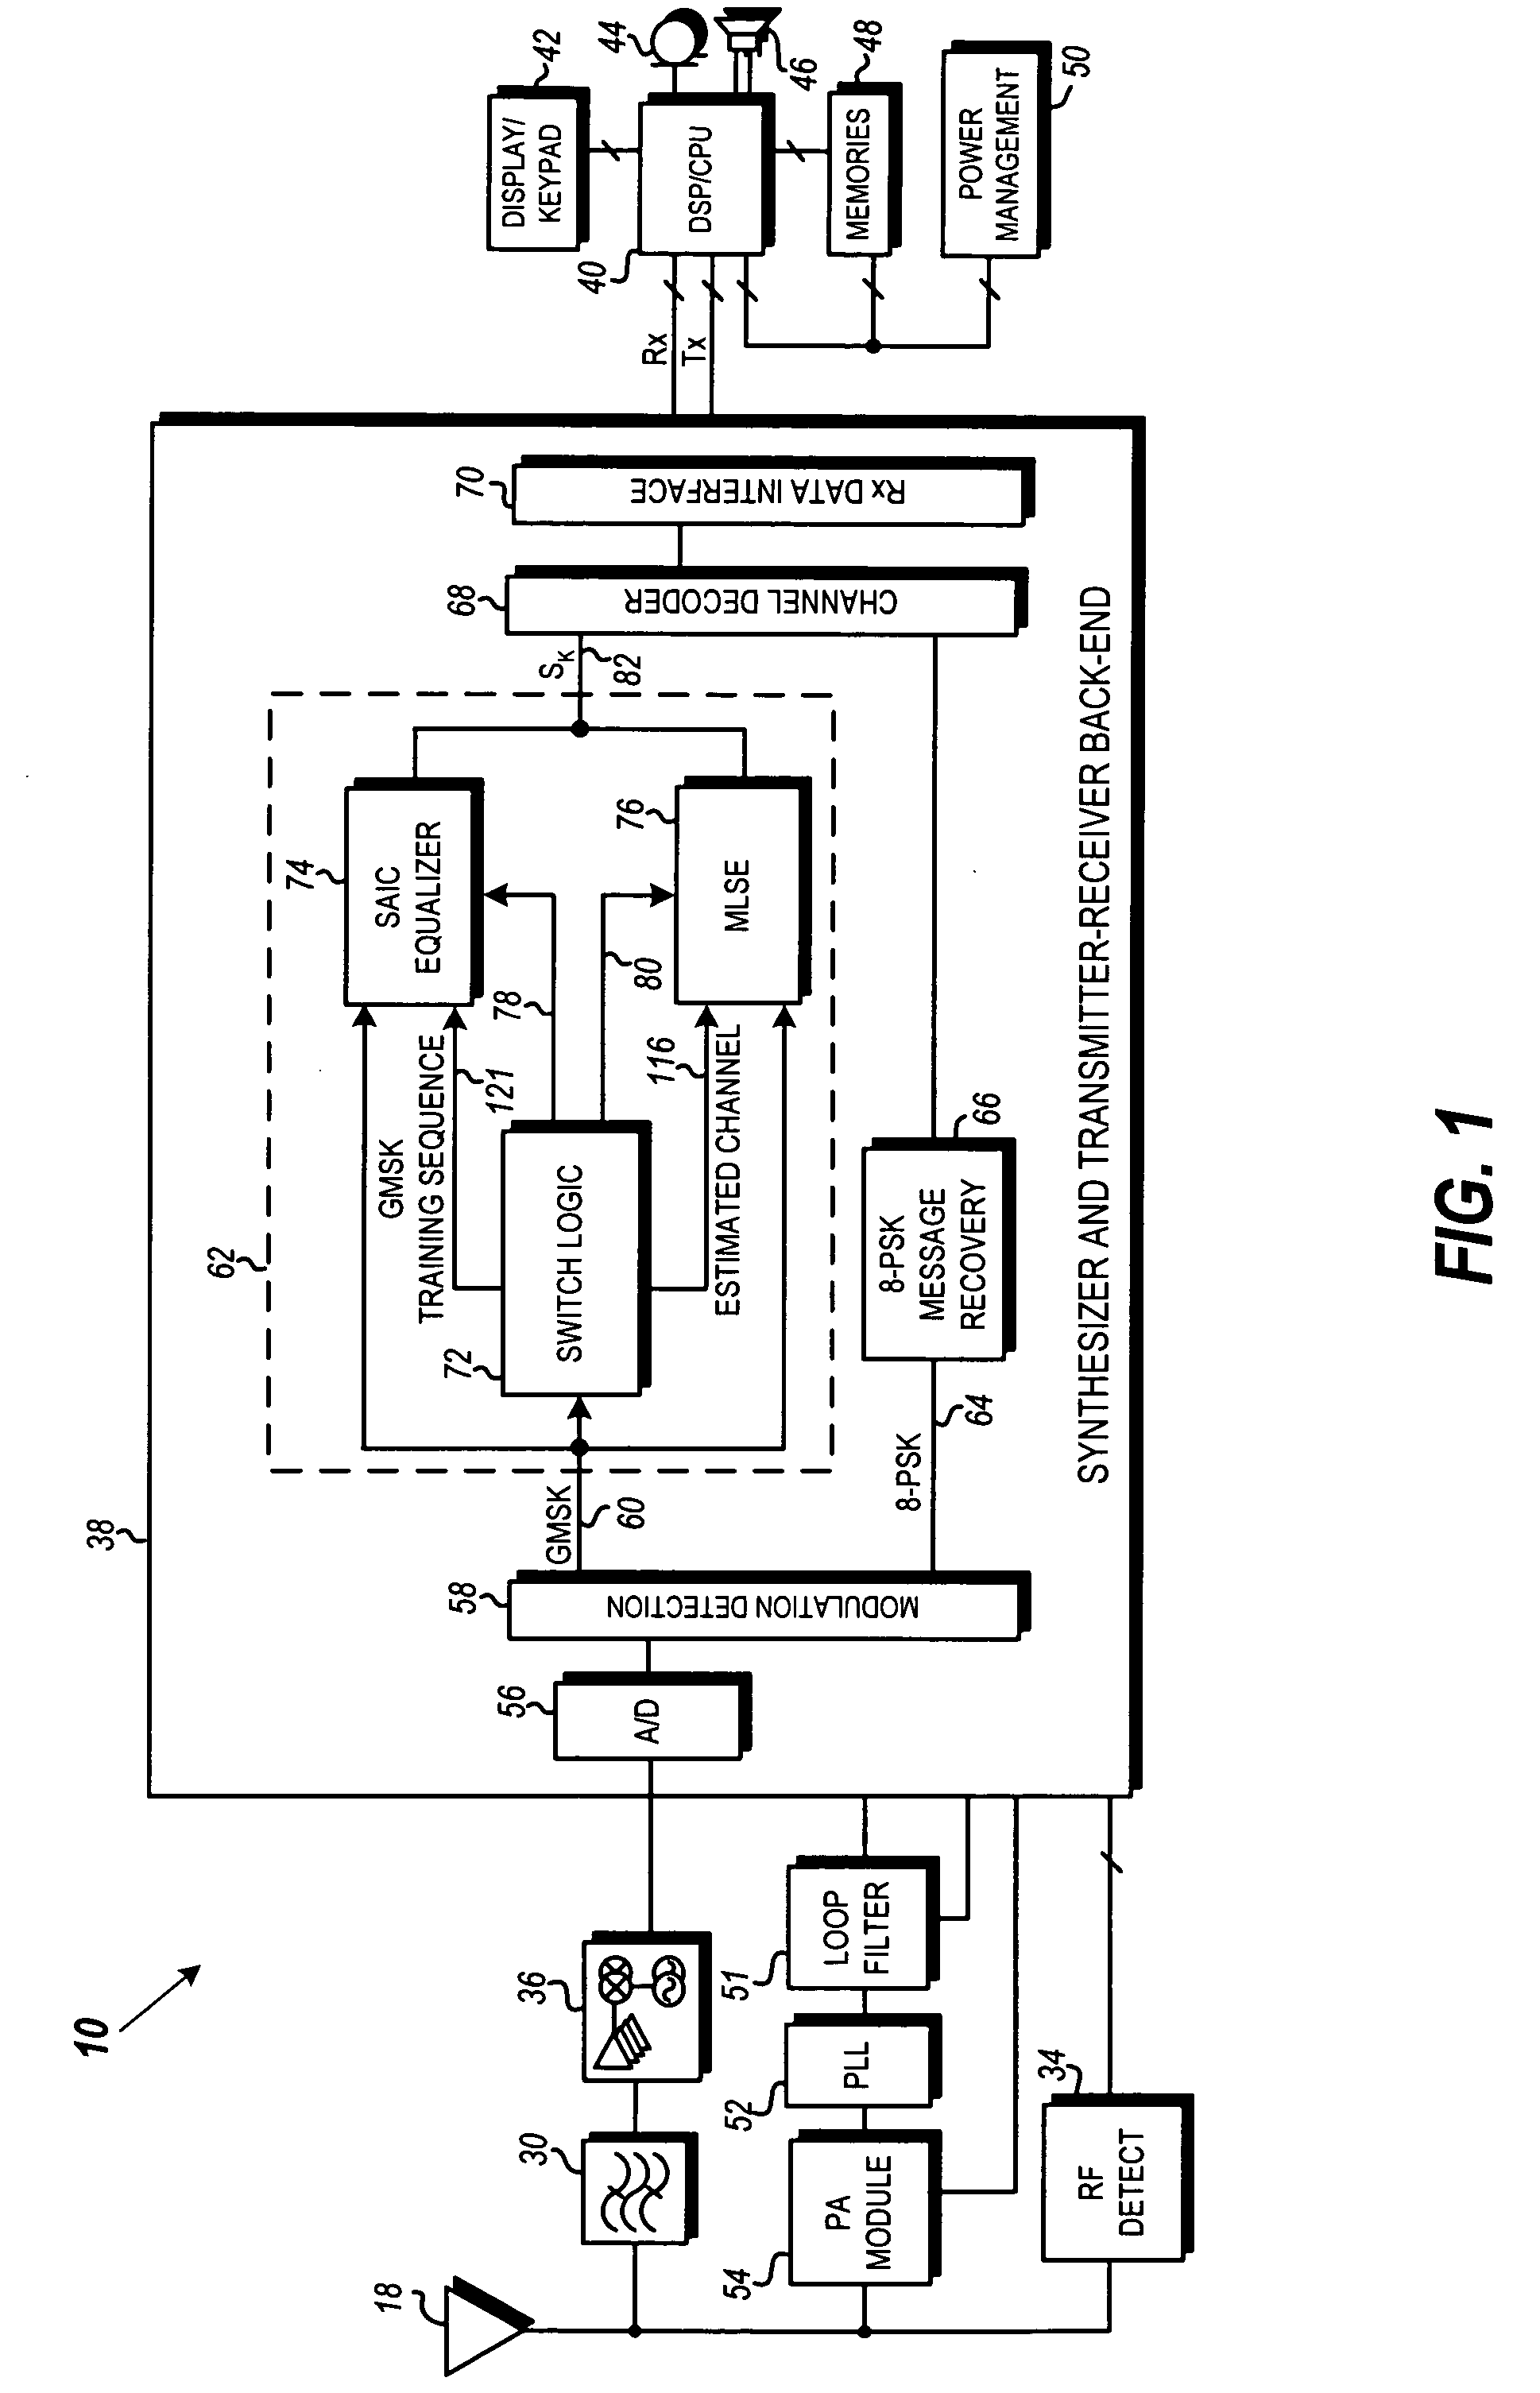 Dynamic switching between MLSE and linear equalizer for single antenna interference cancellation in a GSM communication system